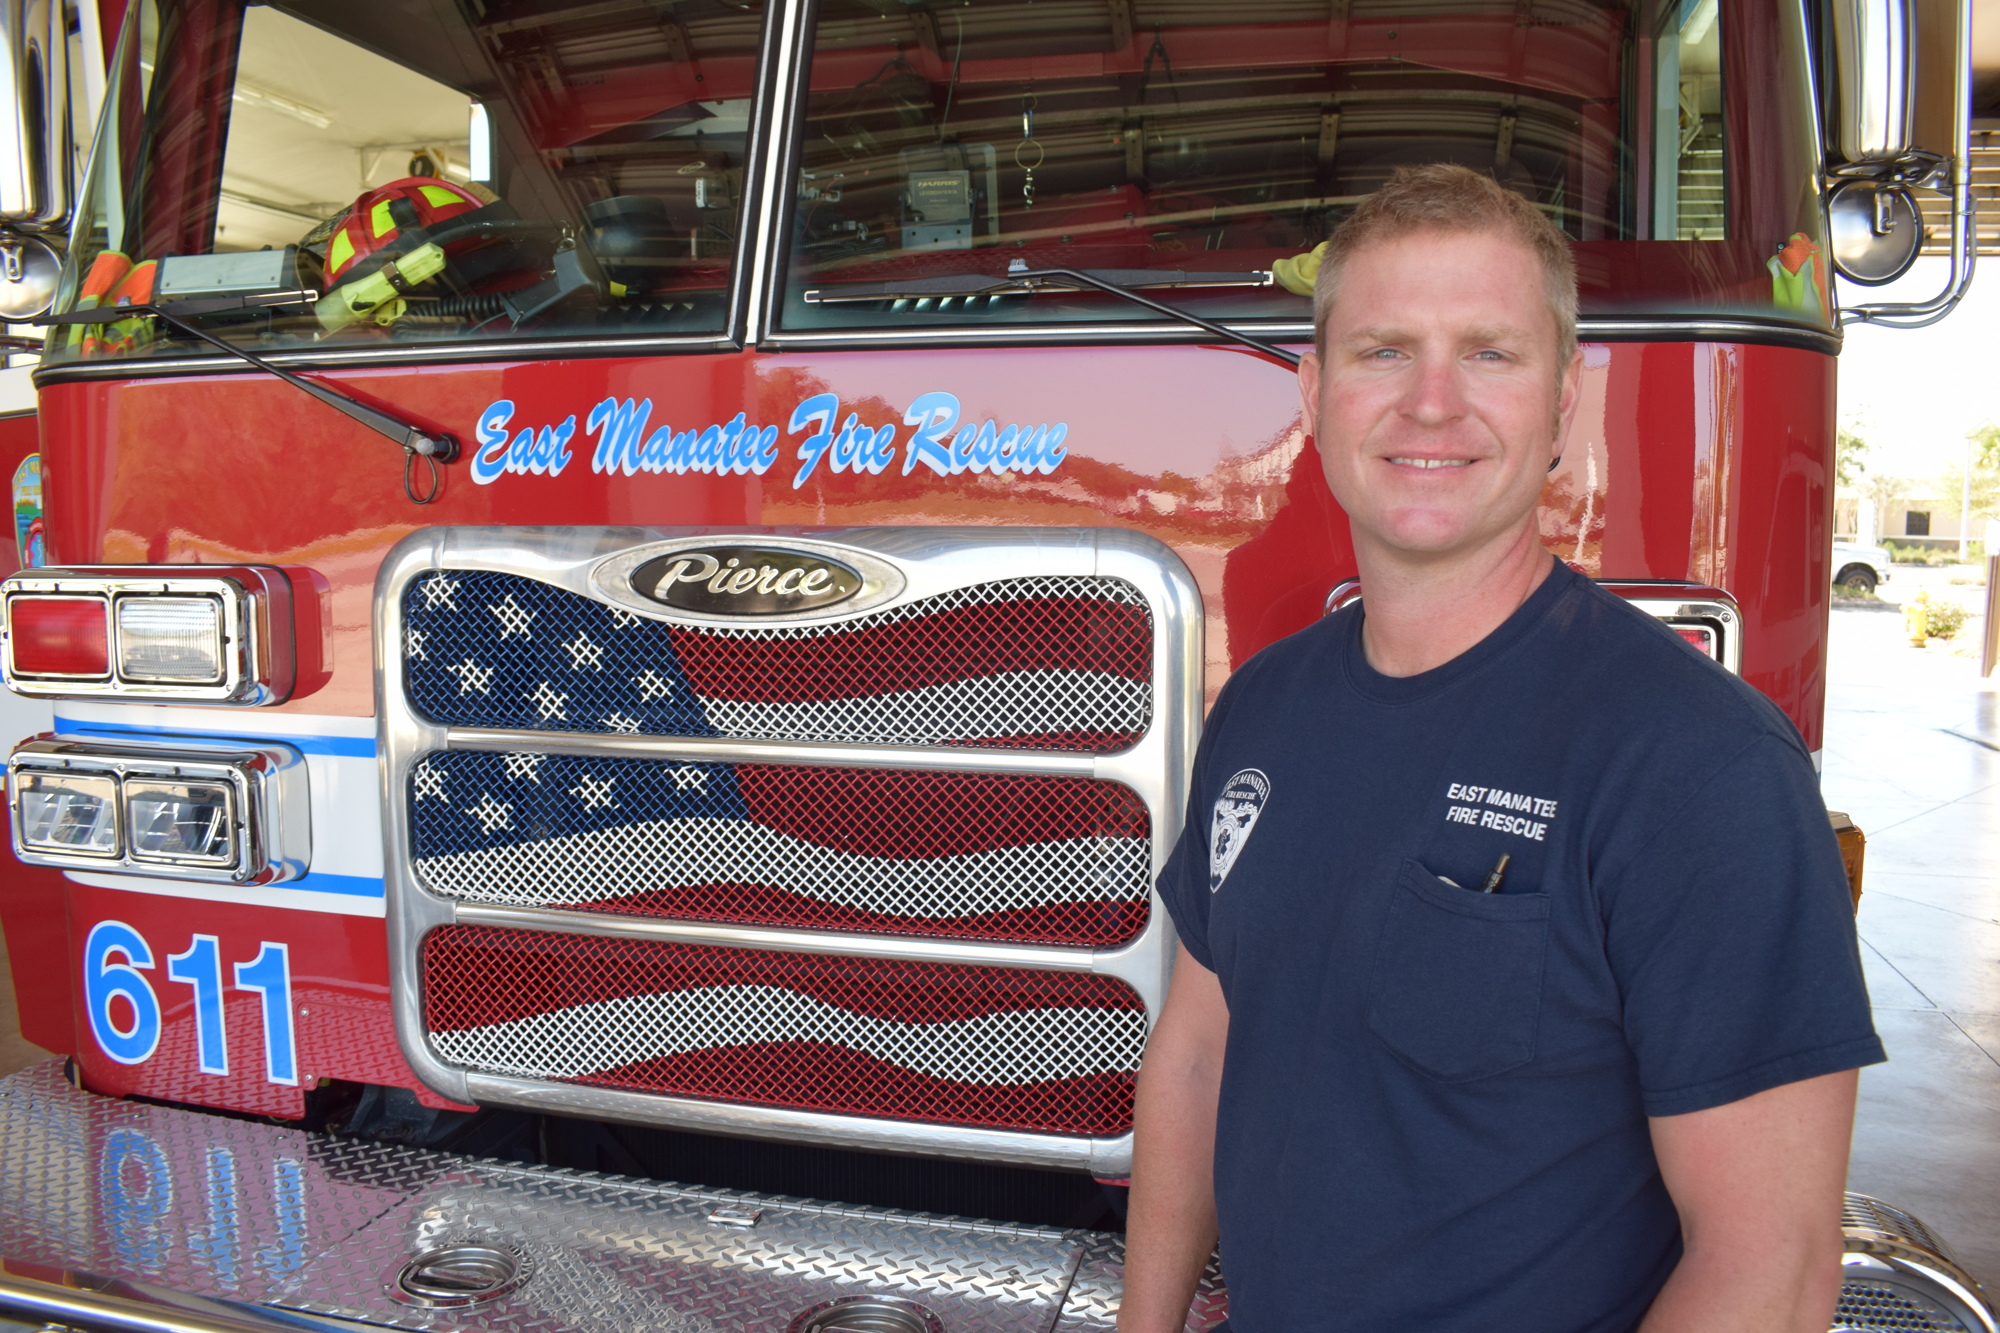 Joe Koehler was named East Manatee Fire Rescue's Firefighter of the Year.